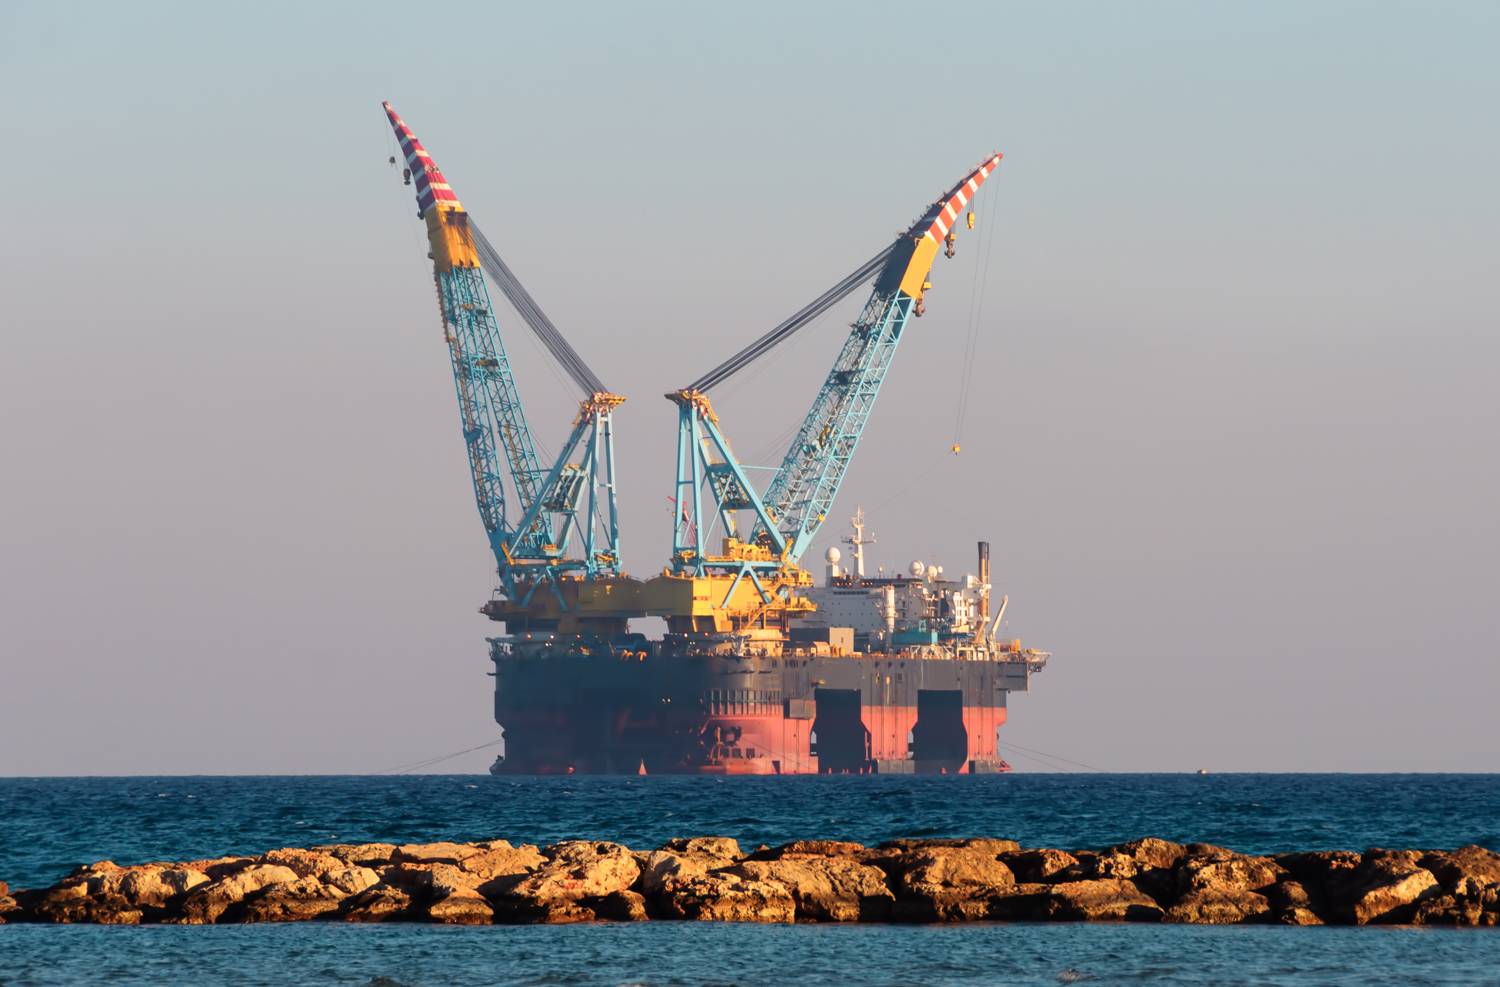 Gas and oil rig in Cyprus. Offshore exploration platform near coast. Photo: Getty Images/iStockphoto